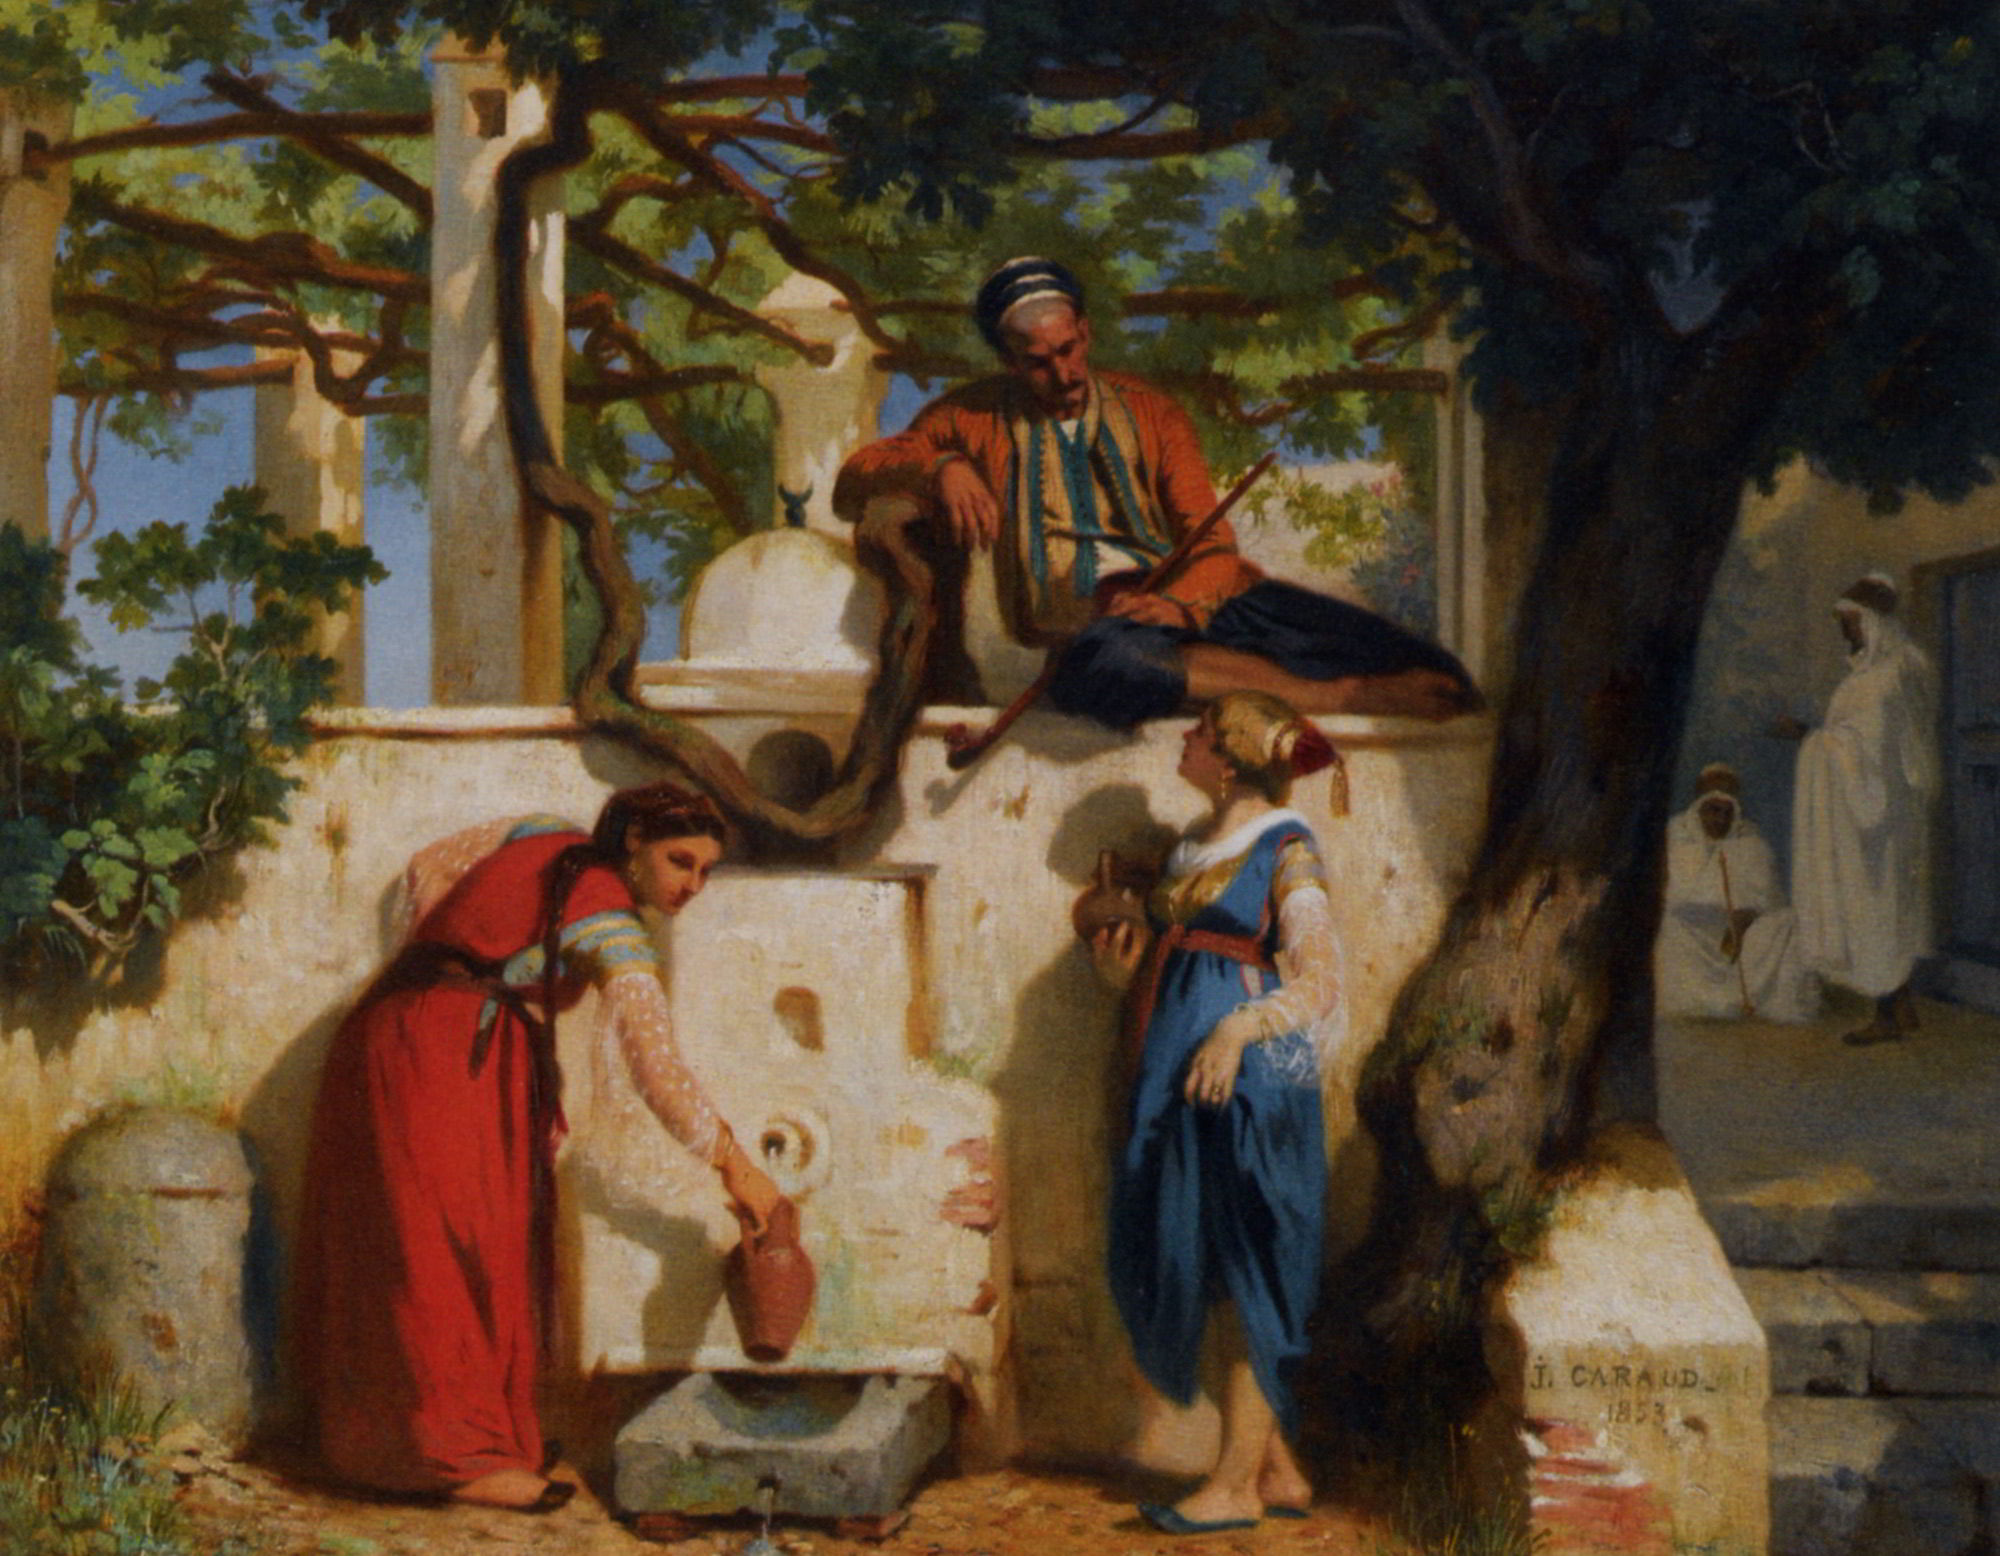 By The Well by Joseph Caraud